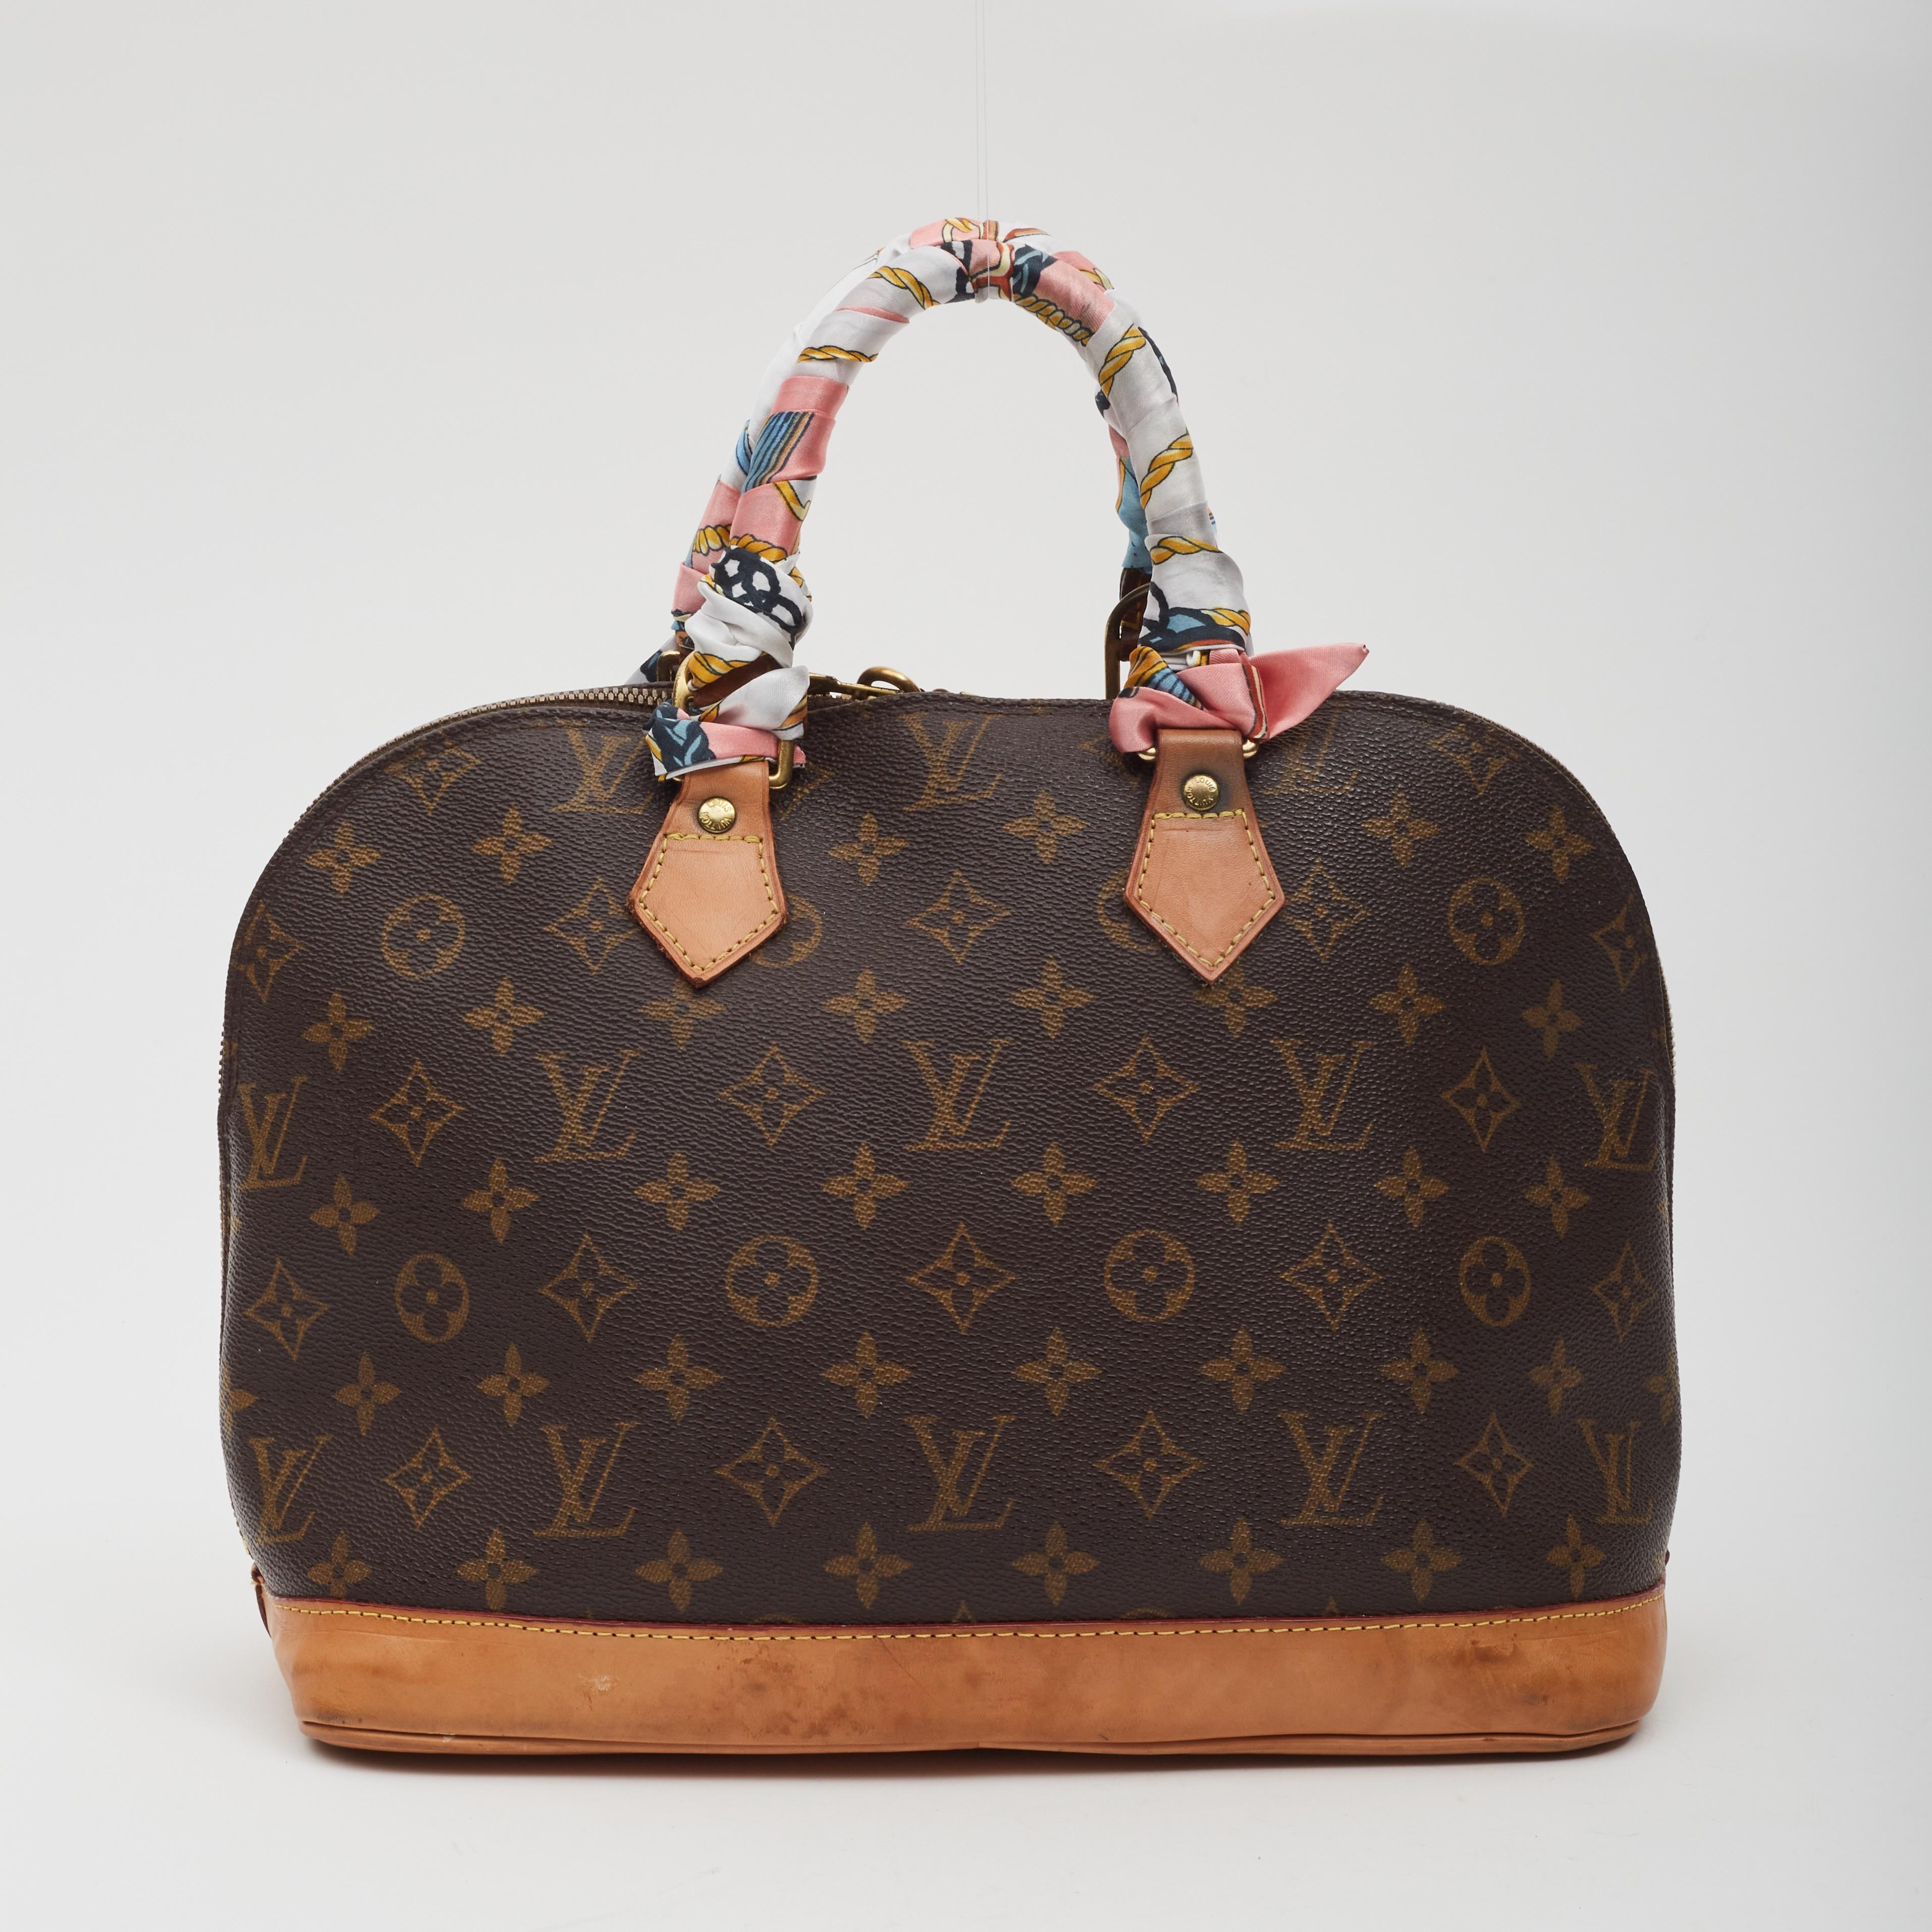 This popular style Louis bag is from 1999.The bag is made of classic Louis Vuitton monogram coated canvas. This structured bag features a signature vachetta cowhide leather trim, a leather bottom,  dual rolled top handles and base with polished